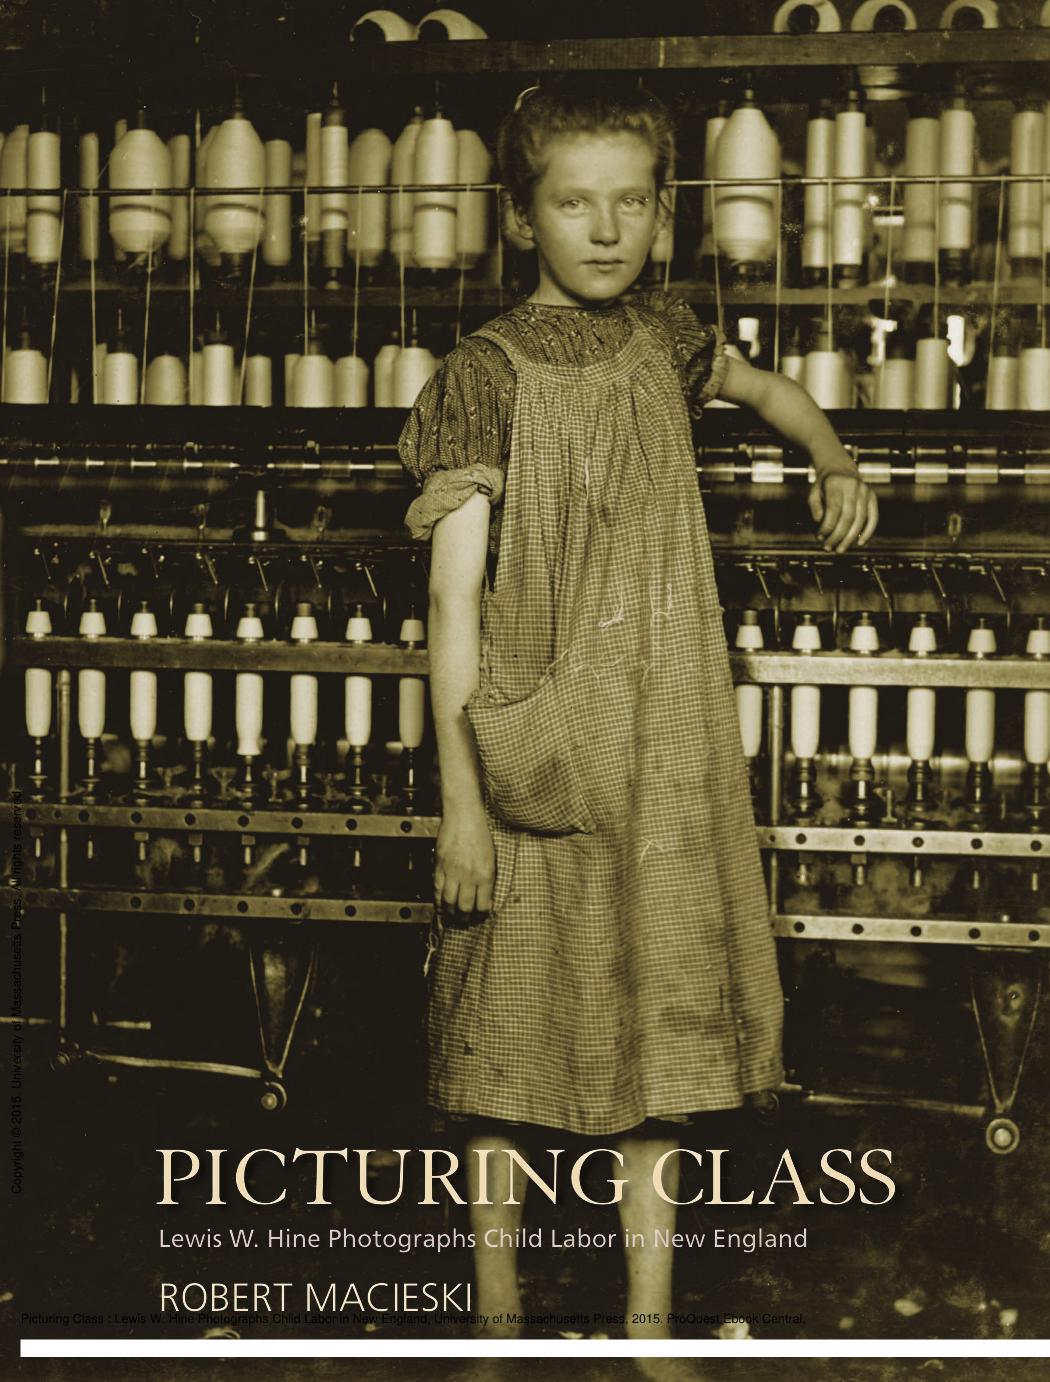 Picturing Class: Lewis W. Hine Photographs Child Labor in New England by Robert Macieski